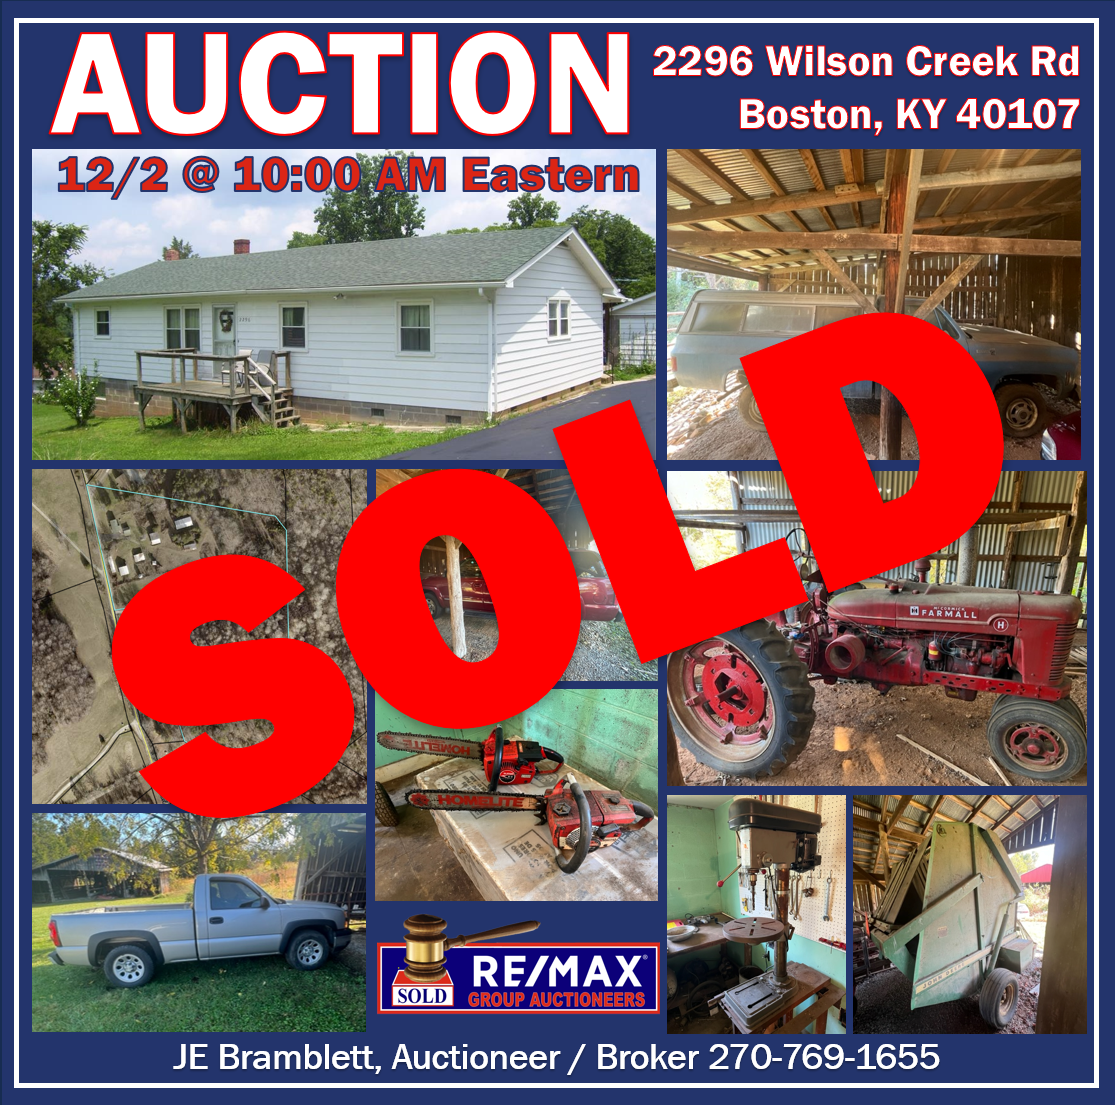 Auction | Home, Barns, 20.7± Acres, Trucks, Equipment, & More | Saturday, December 2nd @ 10:00 am EDT